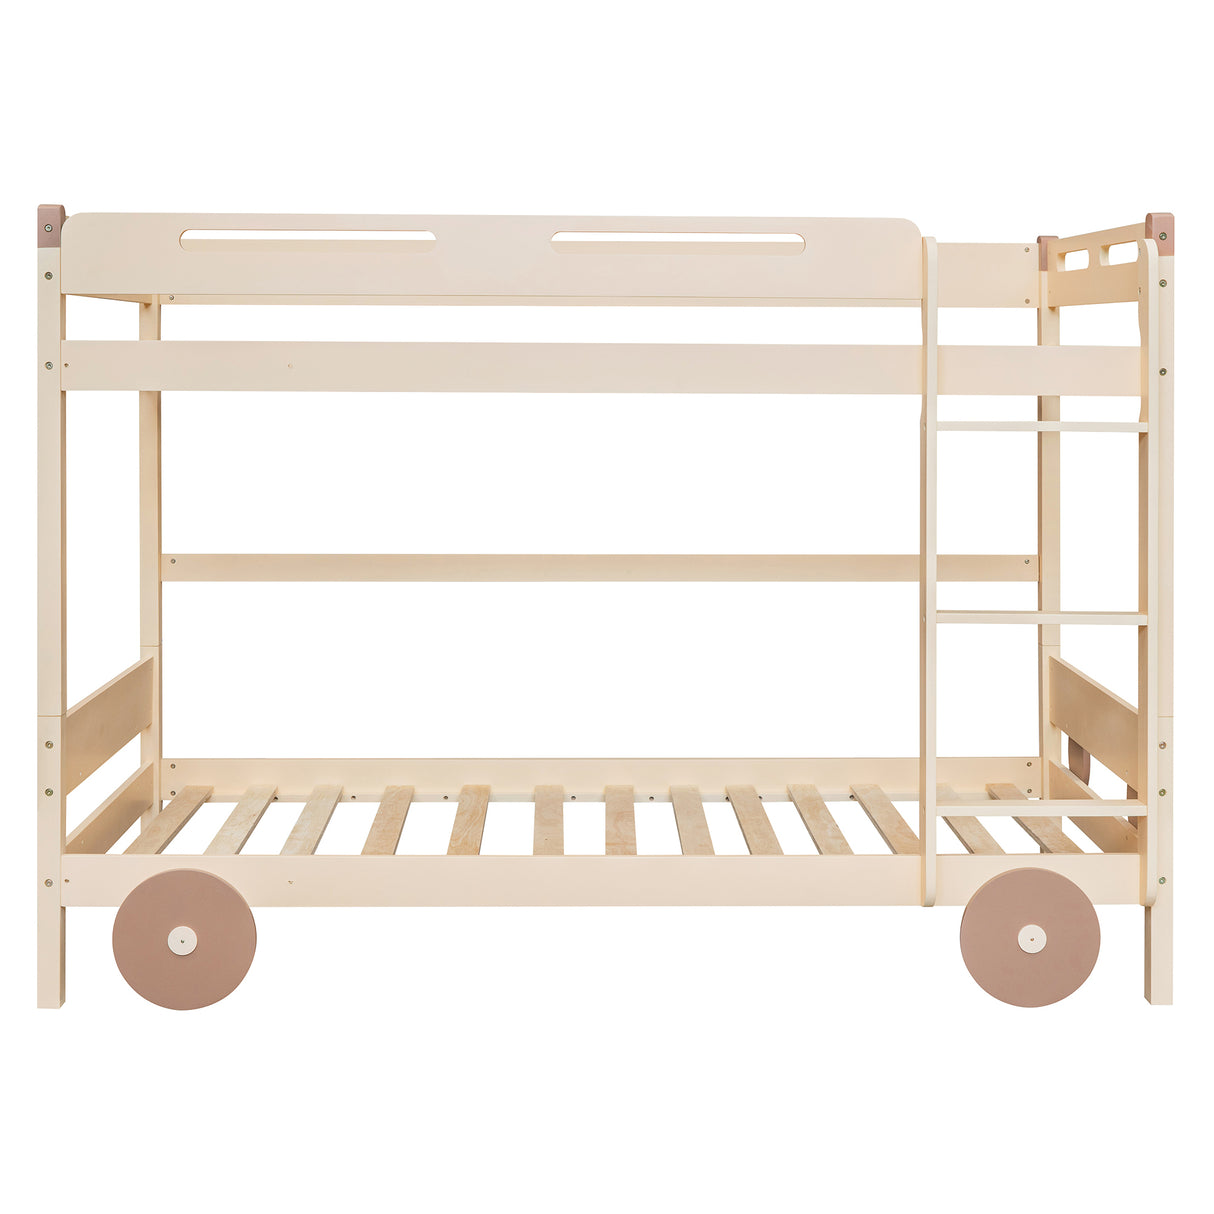 Twin Size Car-Shaped Convertible Bunk Bed, White, Natural+Brown - Home Elegance USA